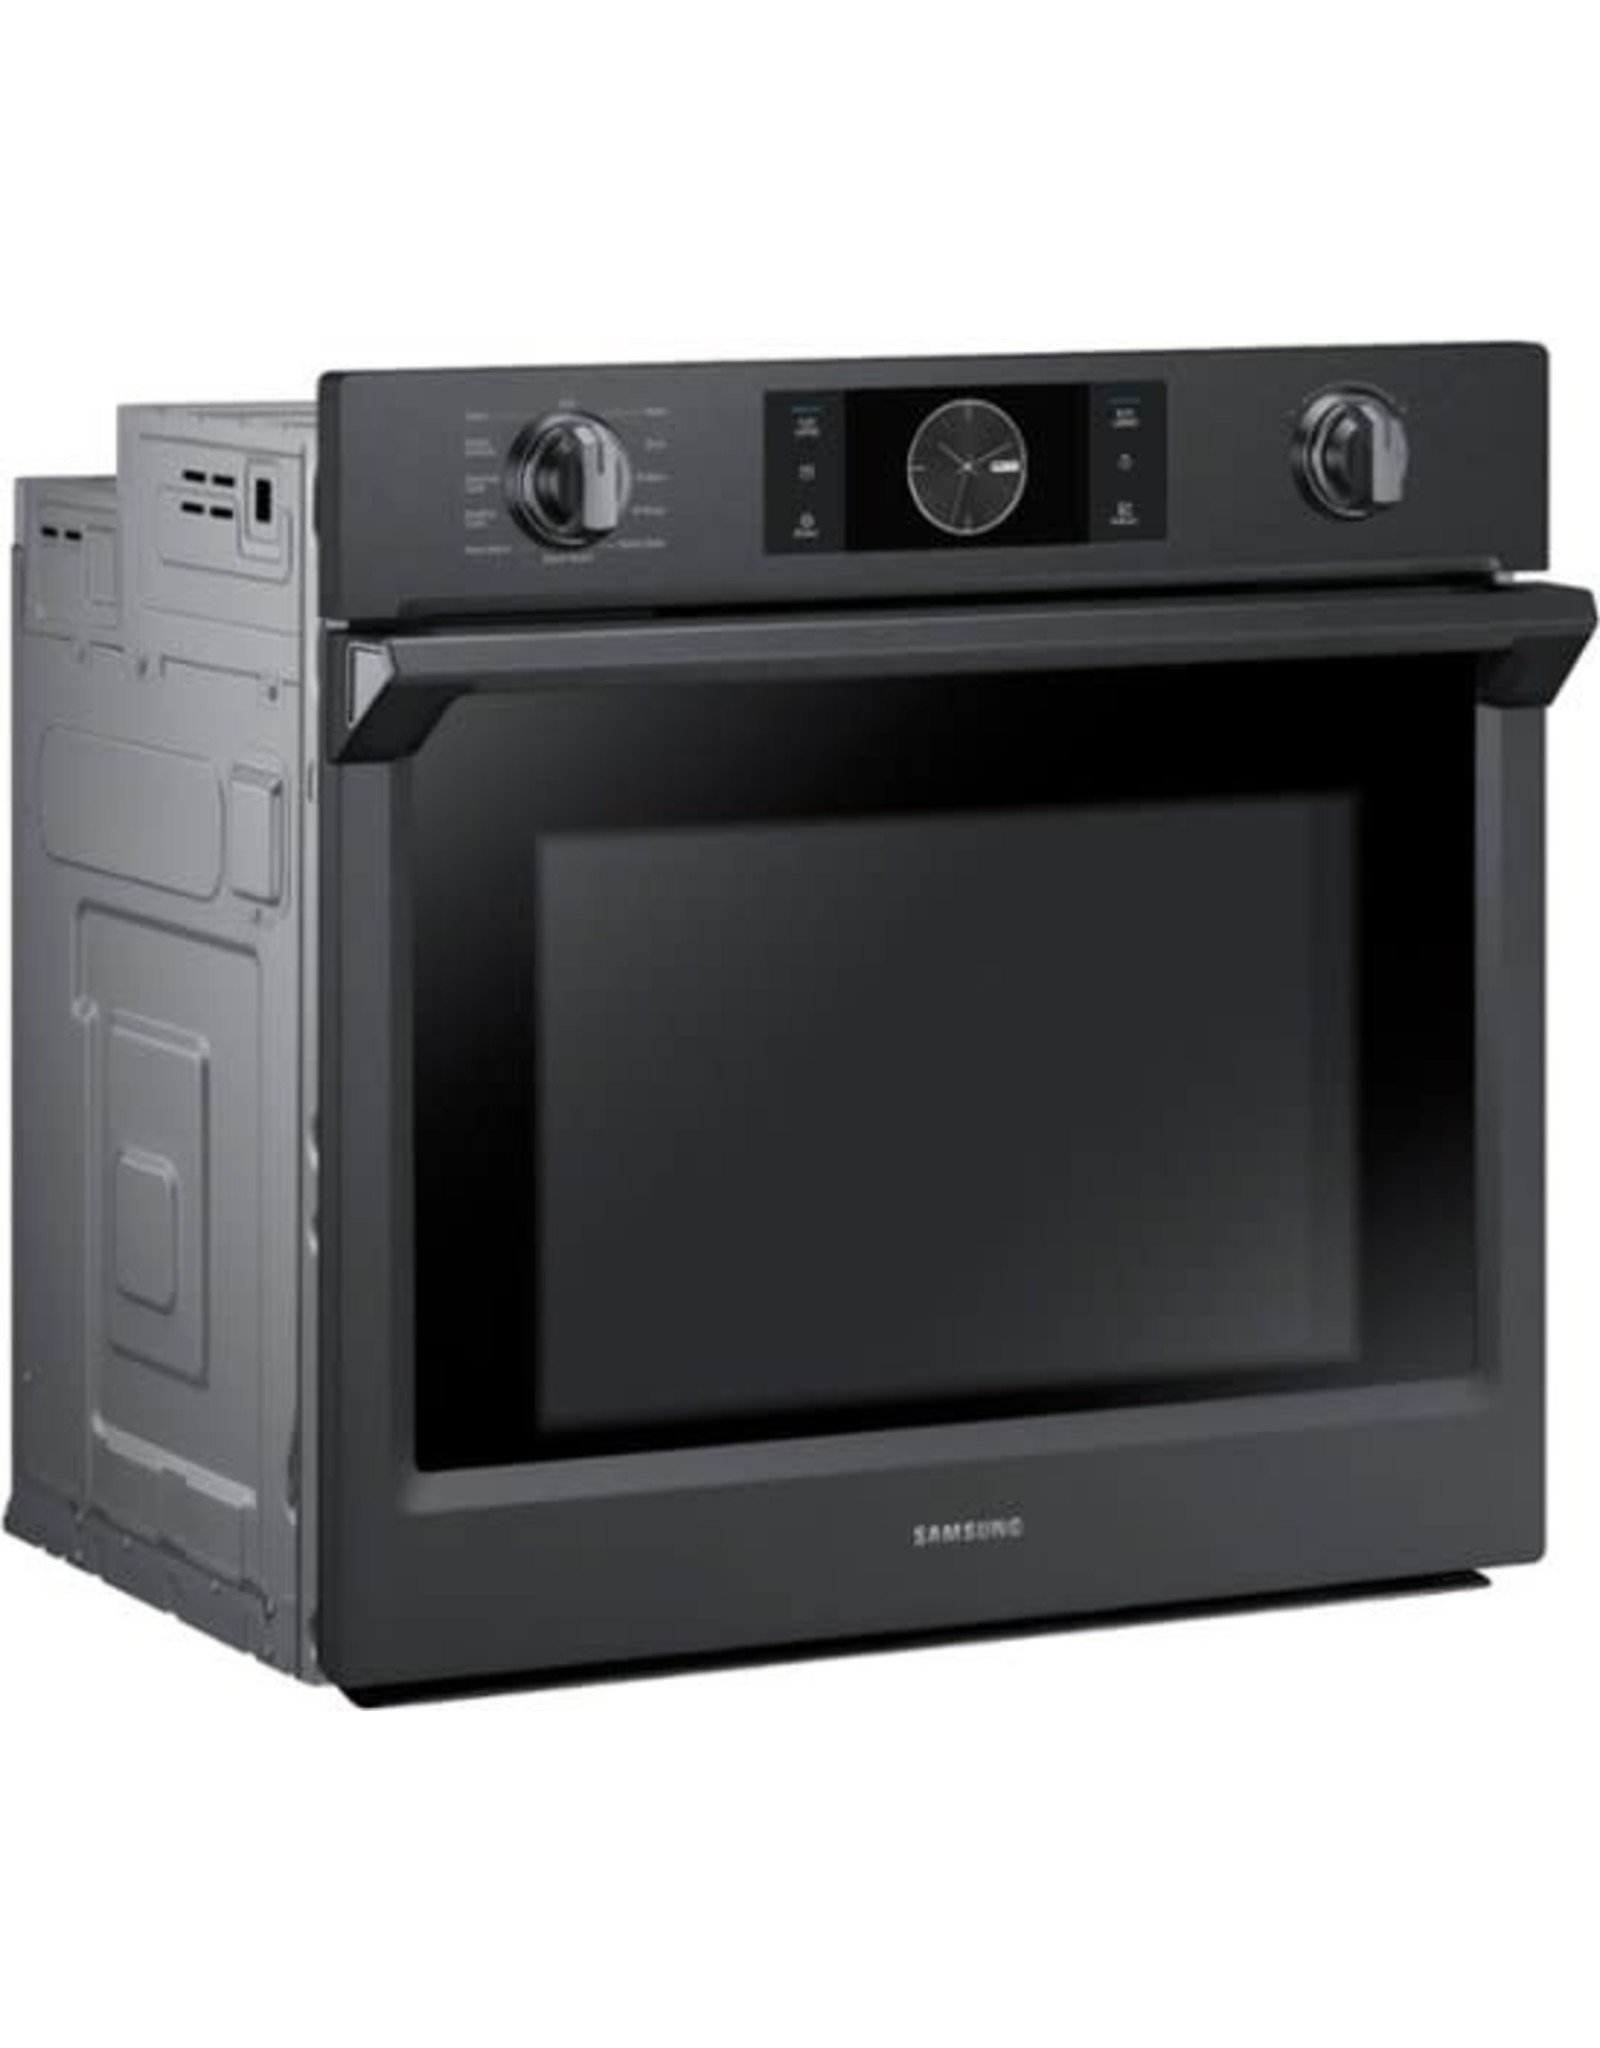 SAMSUNG Samsung  Steam Cook with Flex Duo 30-in Self-Cleaning Convection European Element Single Electric Wall Oven (Fingerprint Resistant Black Stainless Steel)